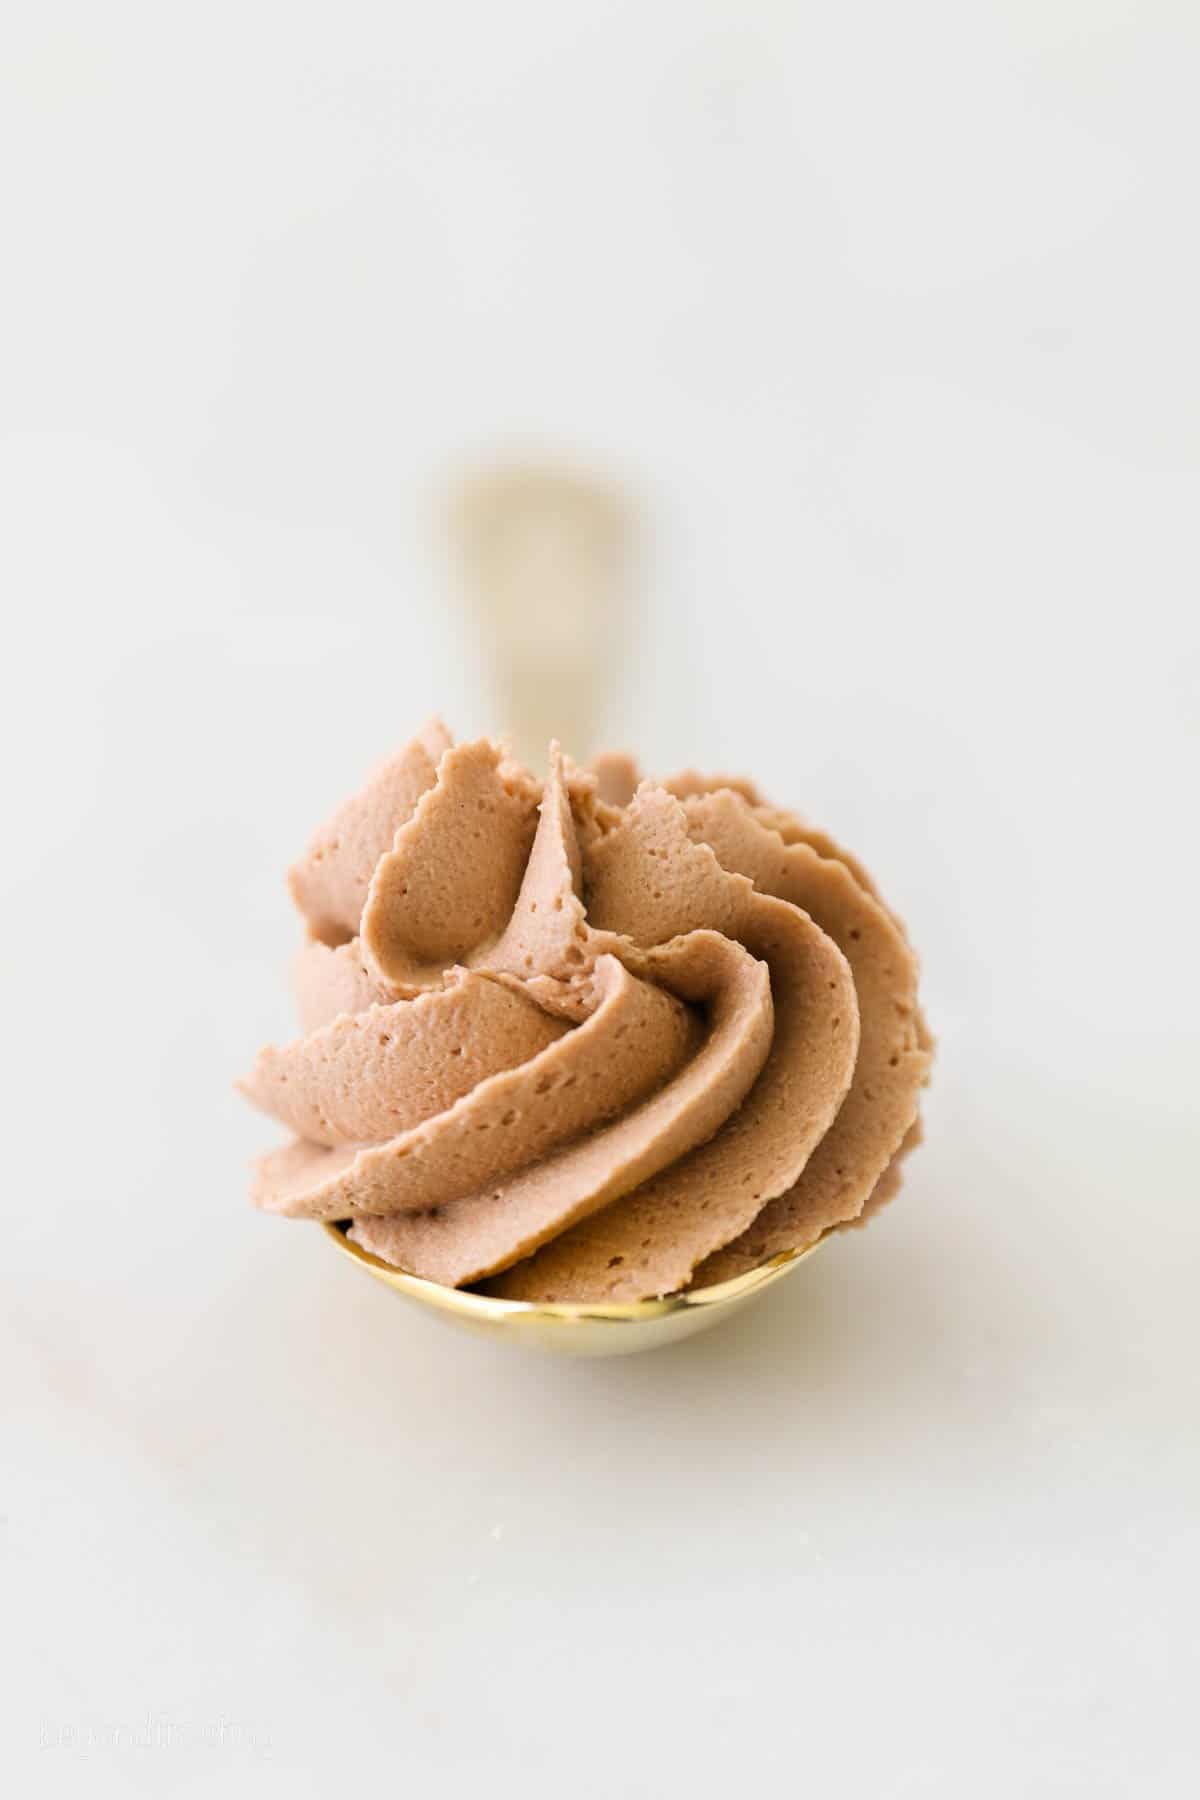 Looking down on a swirl of Nutella buttercream icing in a clear glass.